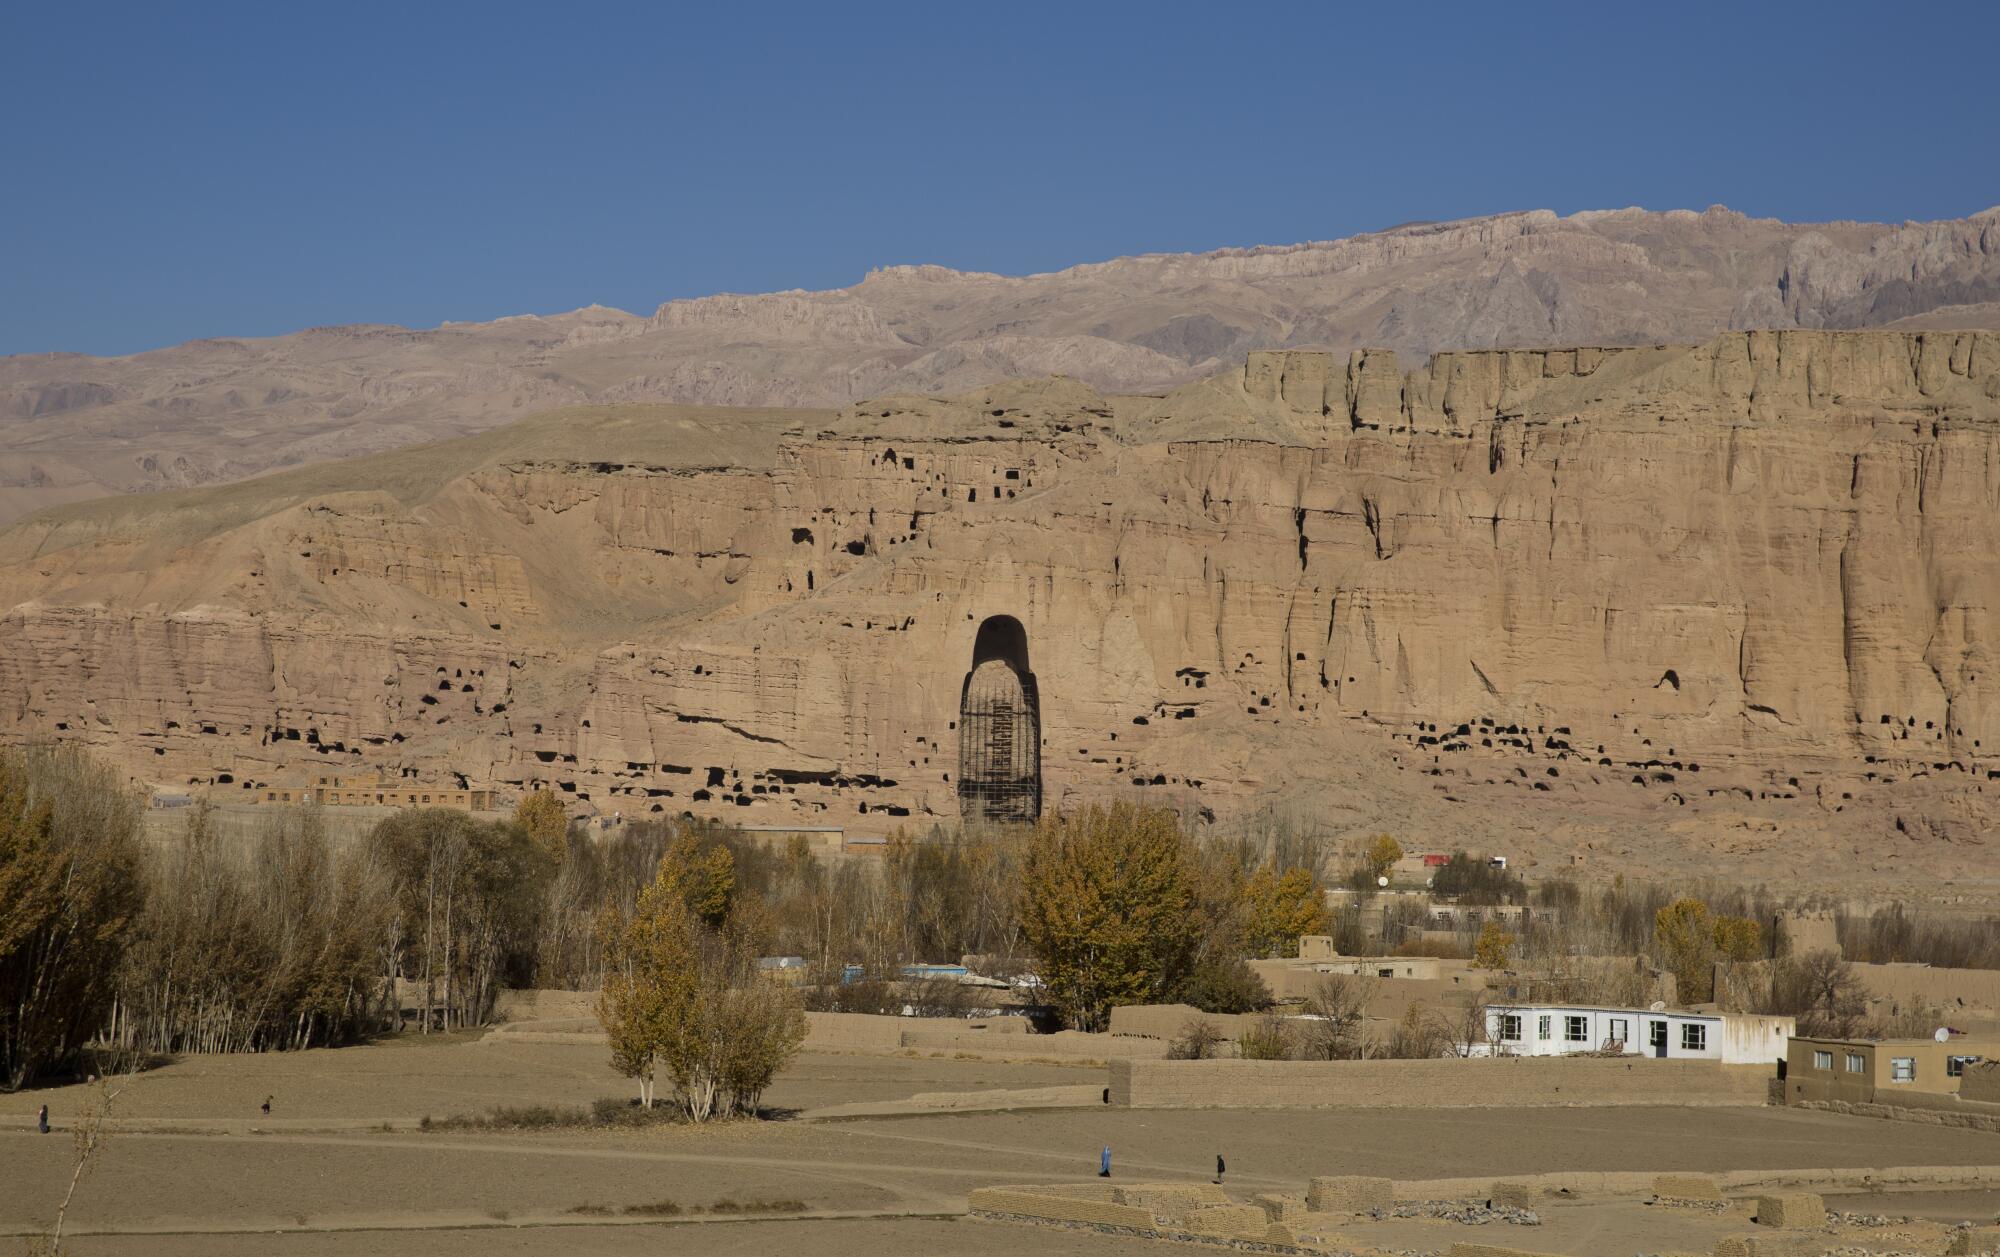 A towering gap in a mountain reveals a niche where one of the great Buddhas of Bamian once stood